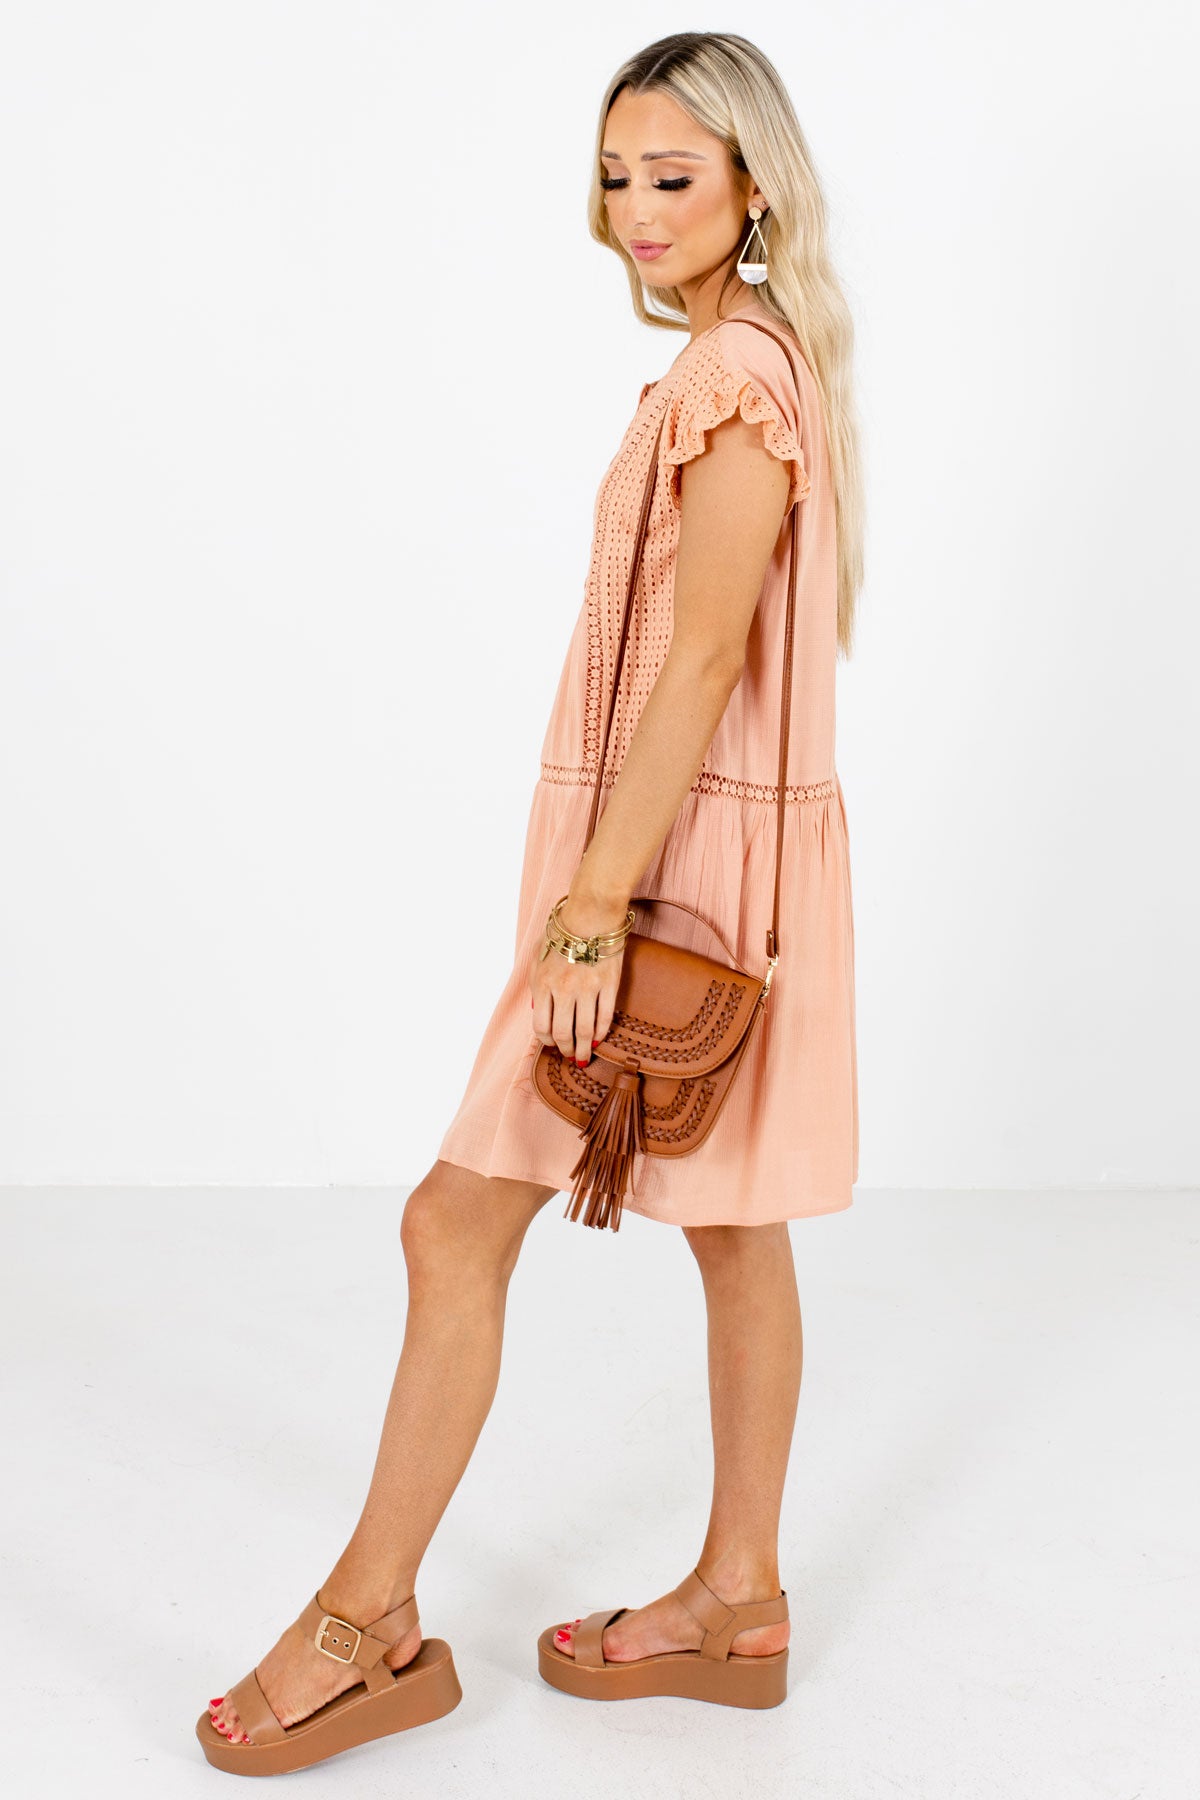 Peach Pink Cute and Comfortable Boutique Mini Dresses for Women